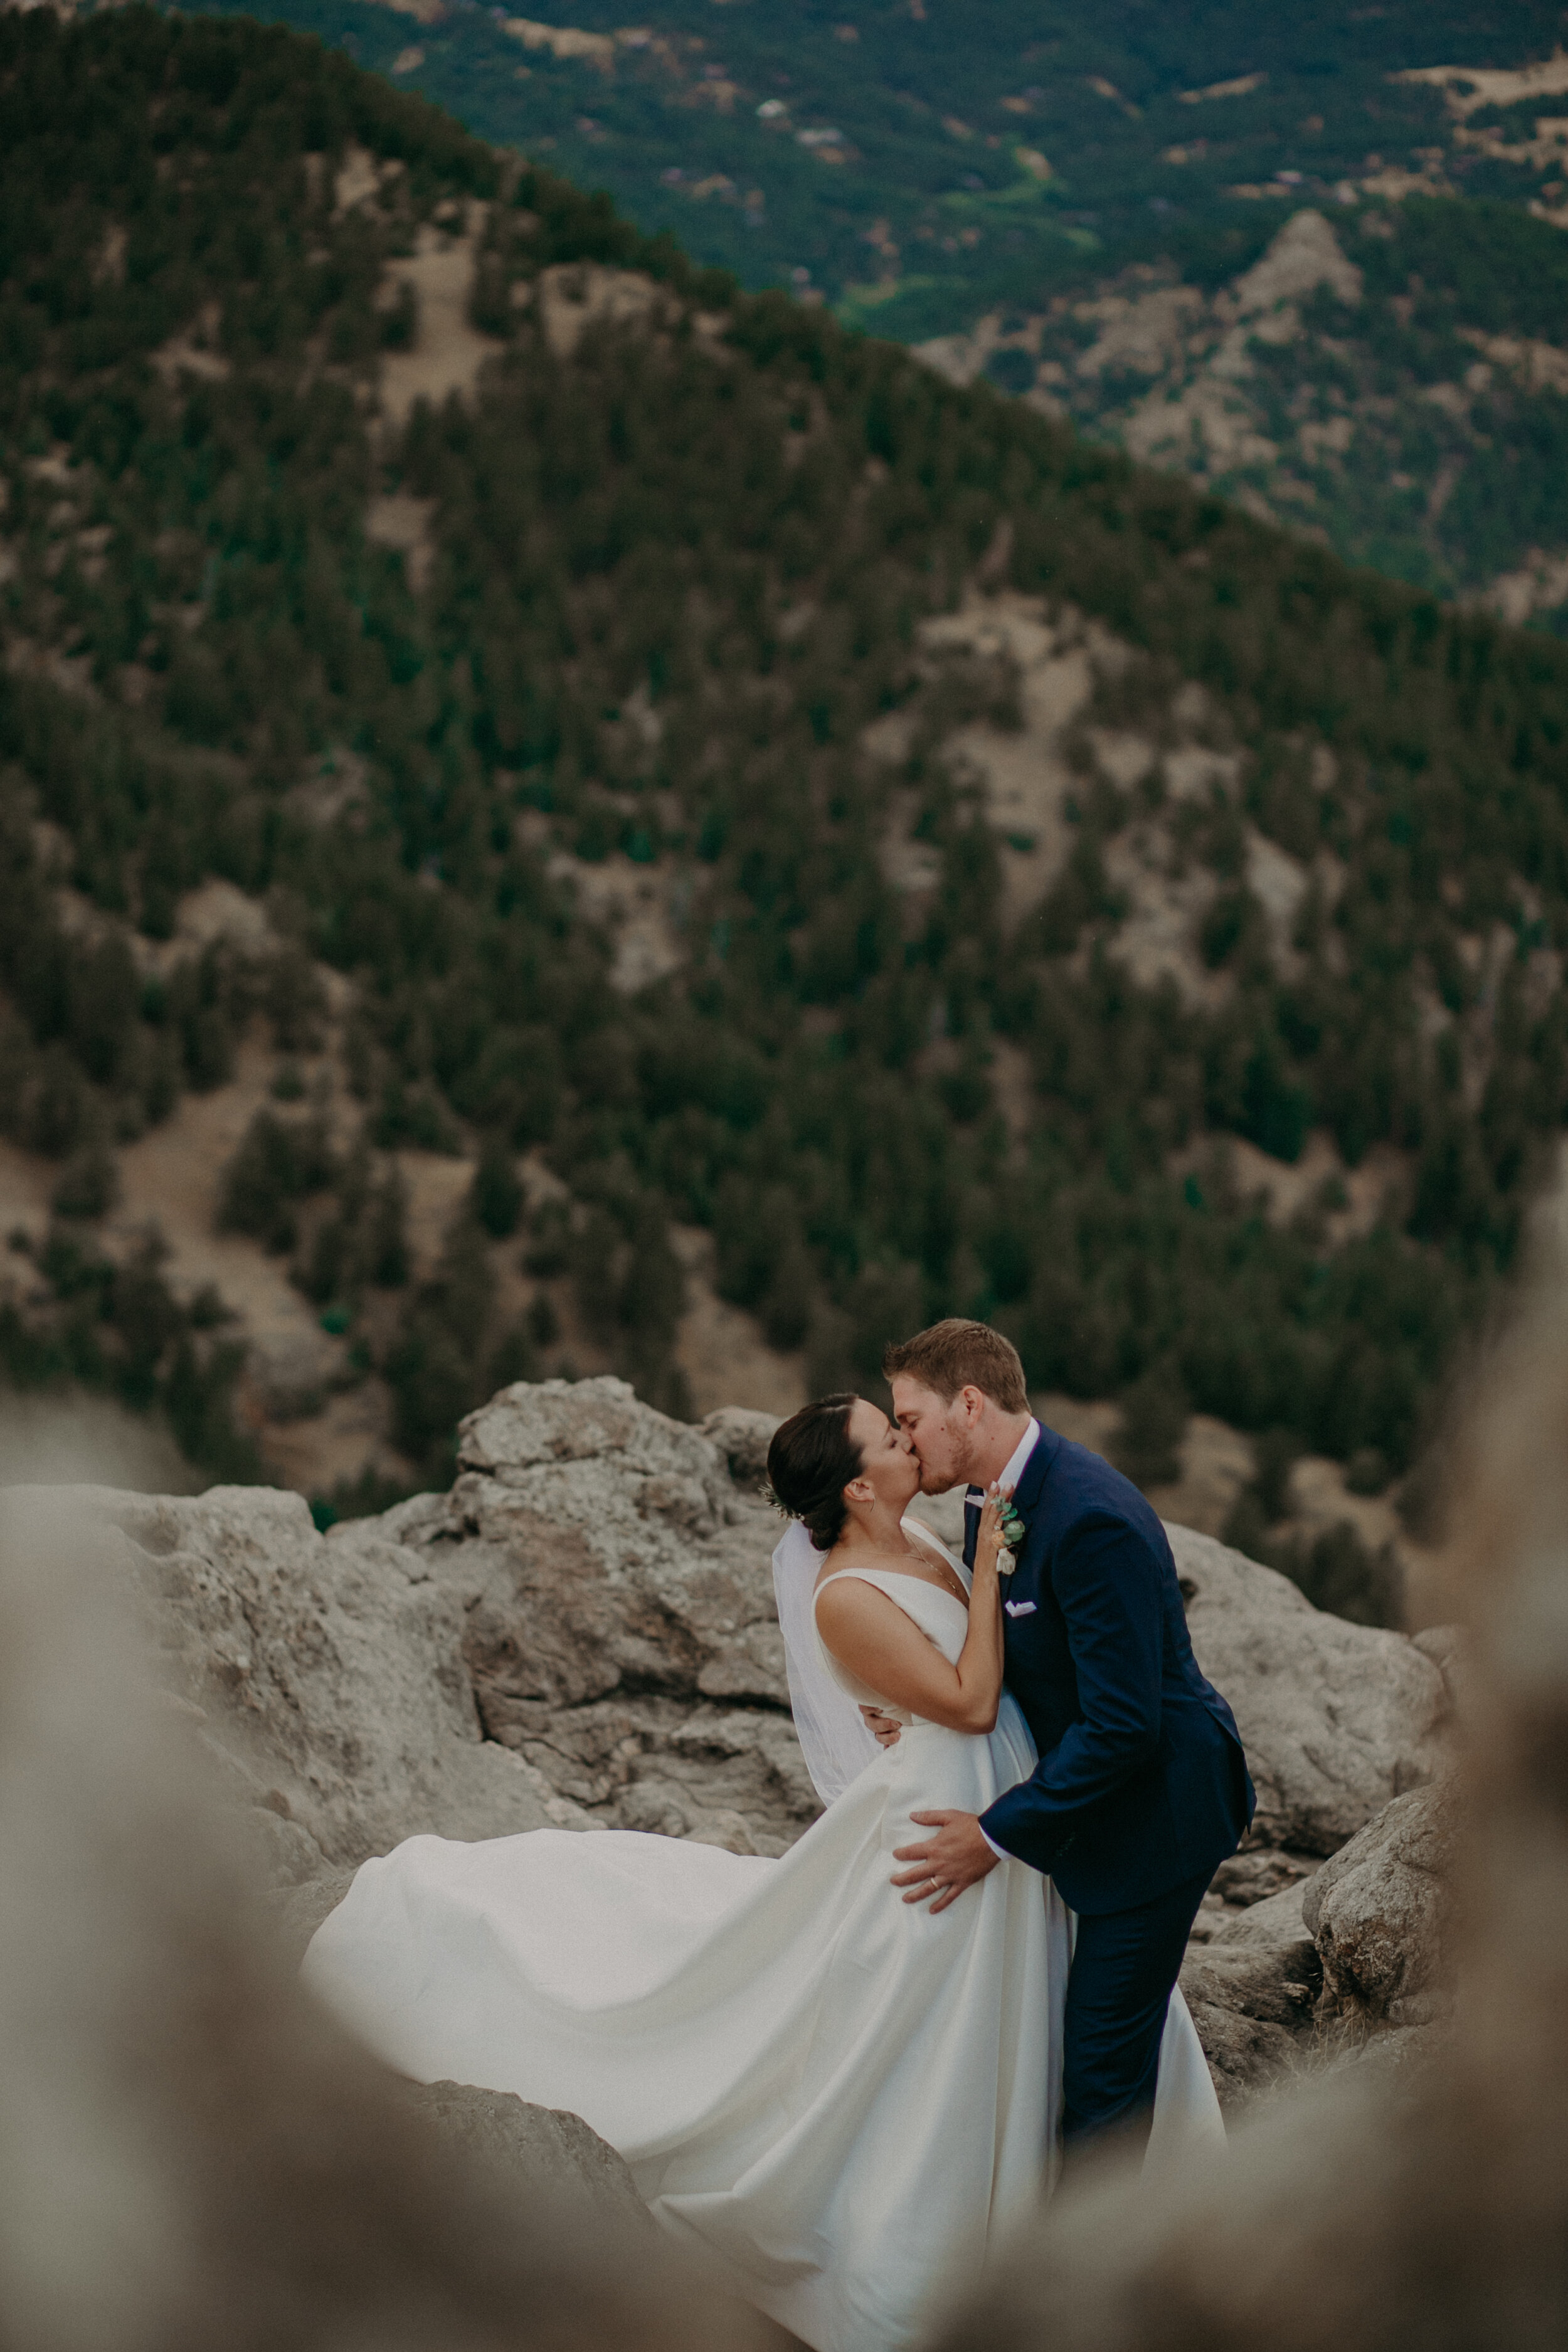  5 big reasons why you should elope with Andrea Wagner Photography #bouldercoelopement #elopetocolorado #elopementphotographer #coloradoweddingphotographer #coloradoelopementphotographer #sunriseampitheatre #sunriseampitheatrewedding #sunriseamphithe